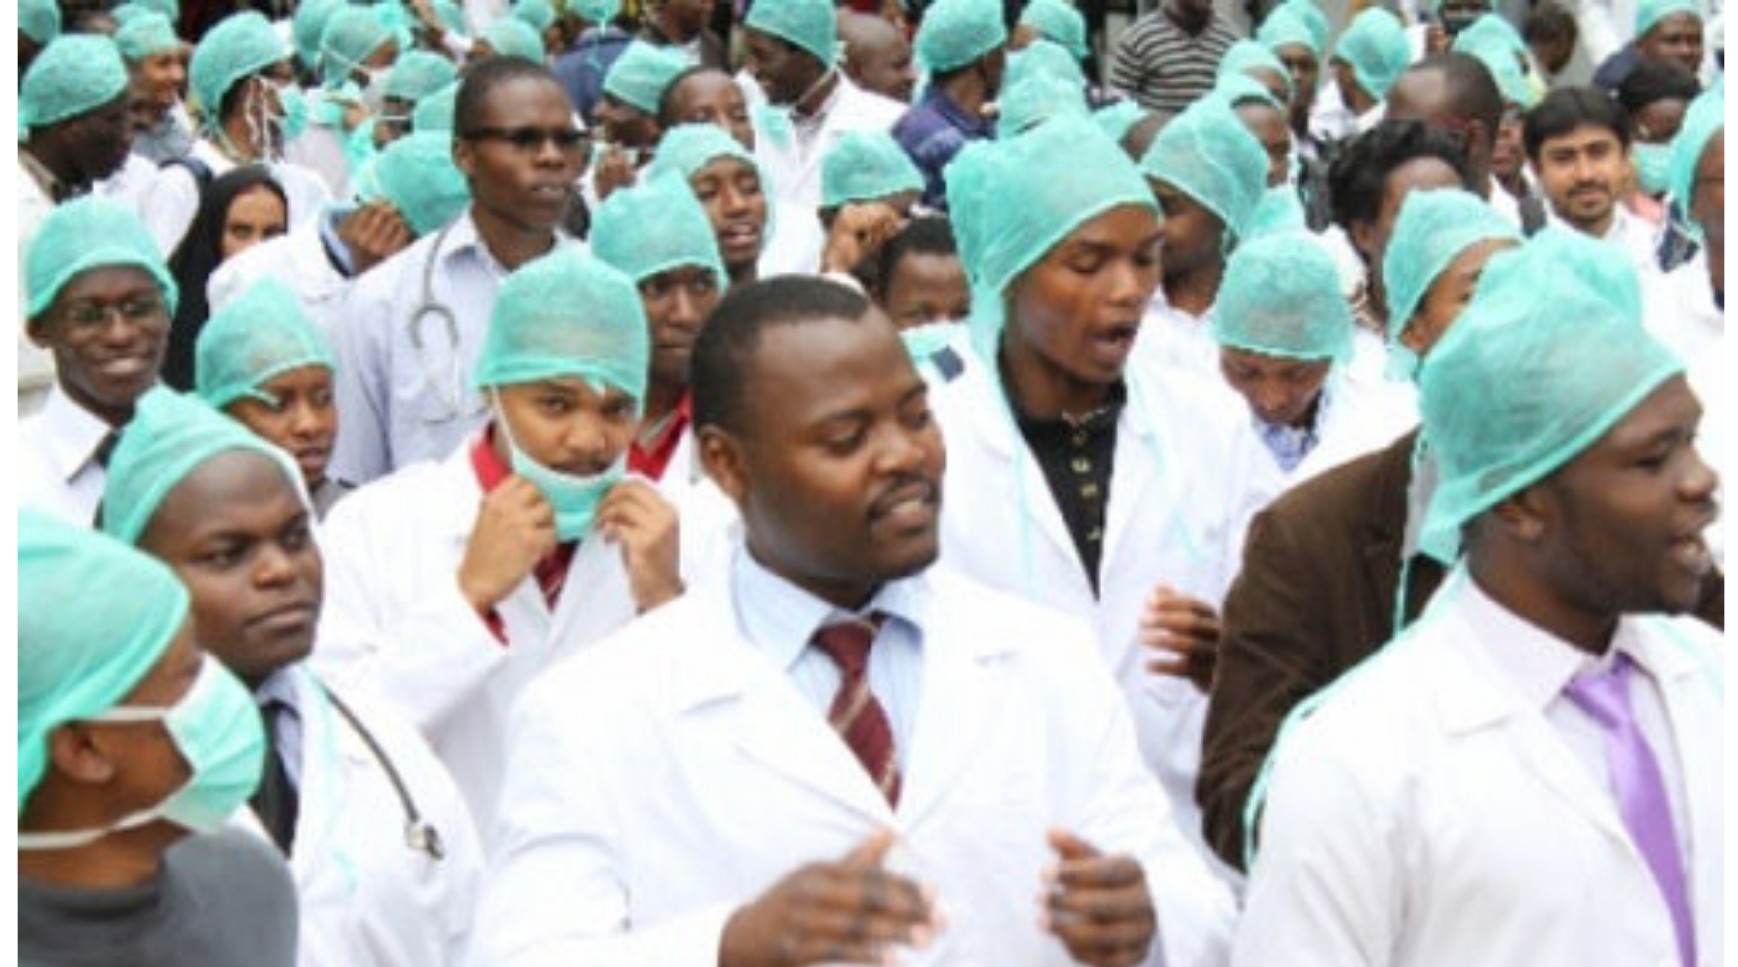 Nigerian Doctors reject FG's plan to accept help from Chinese doctors